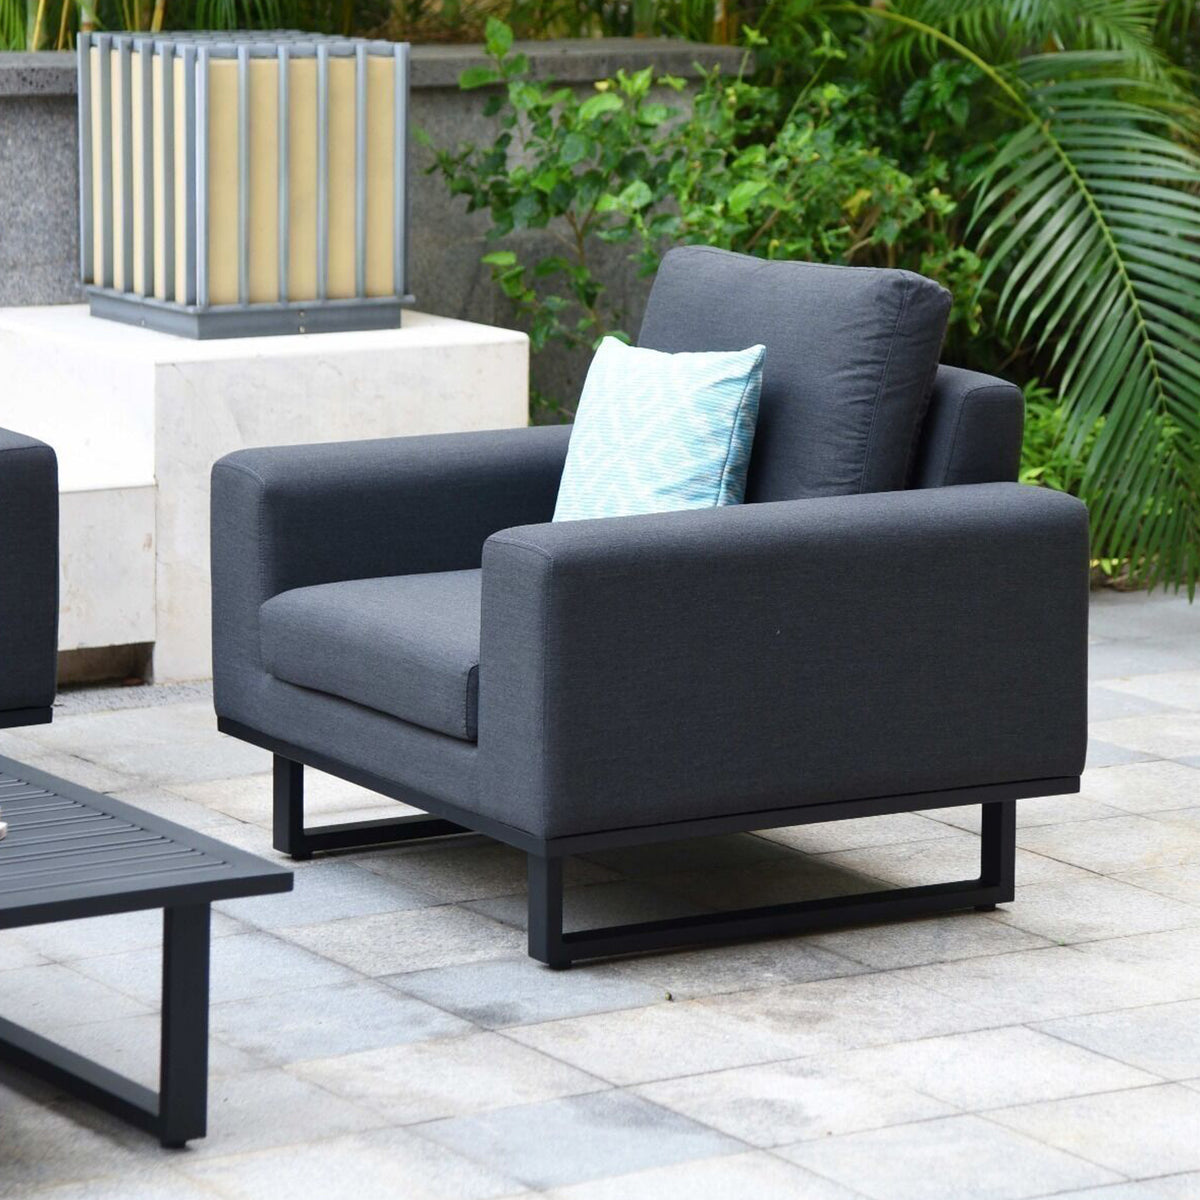 Maze Ethos Charcoal 2 Seat Outdoor Sofa Set from Roseland Furniture